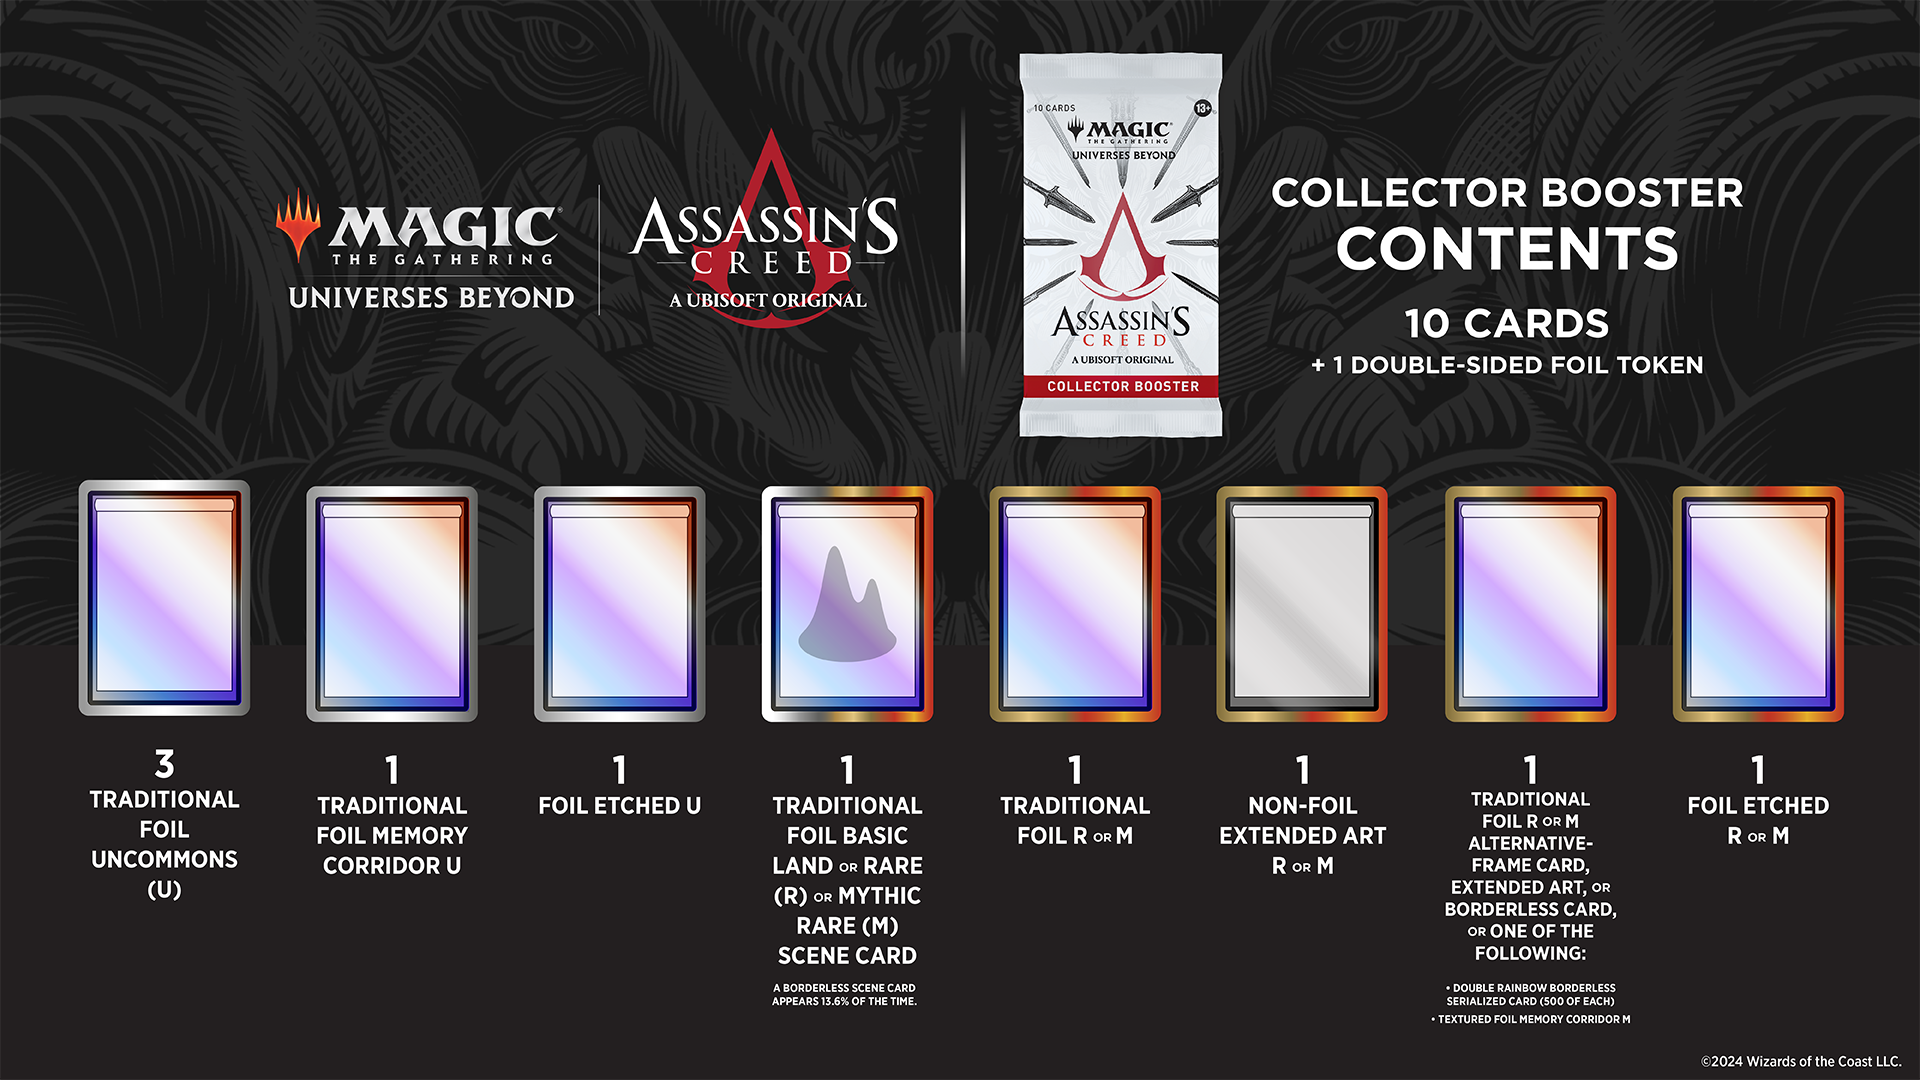 Magic: The Gathering – Assassin's Creed Collector Booster Graphic